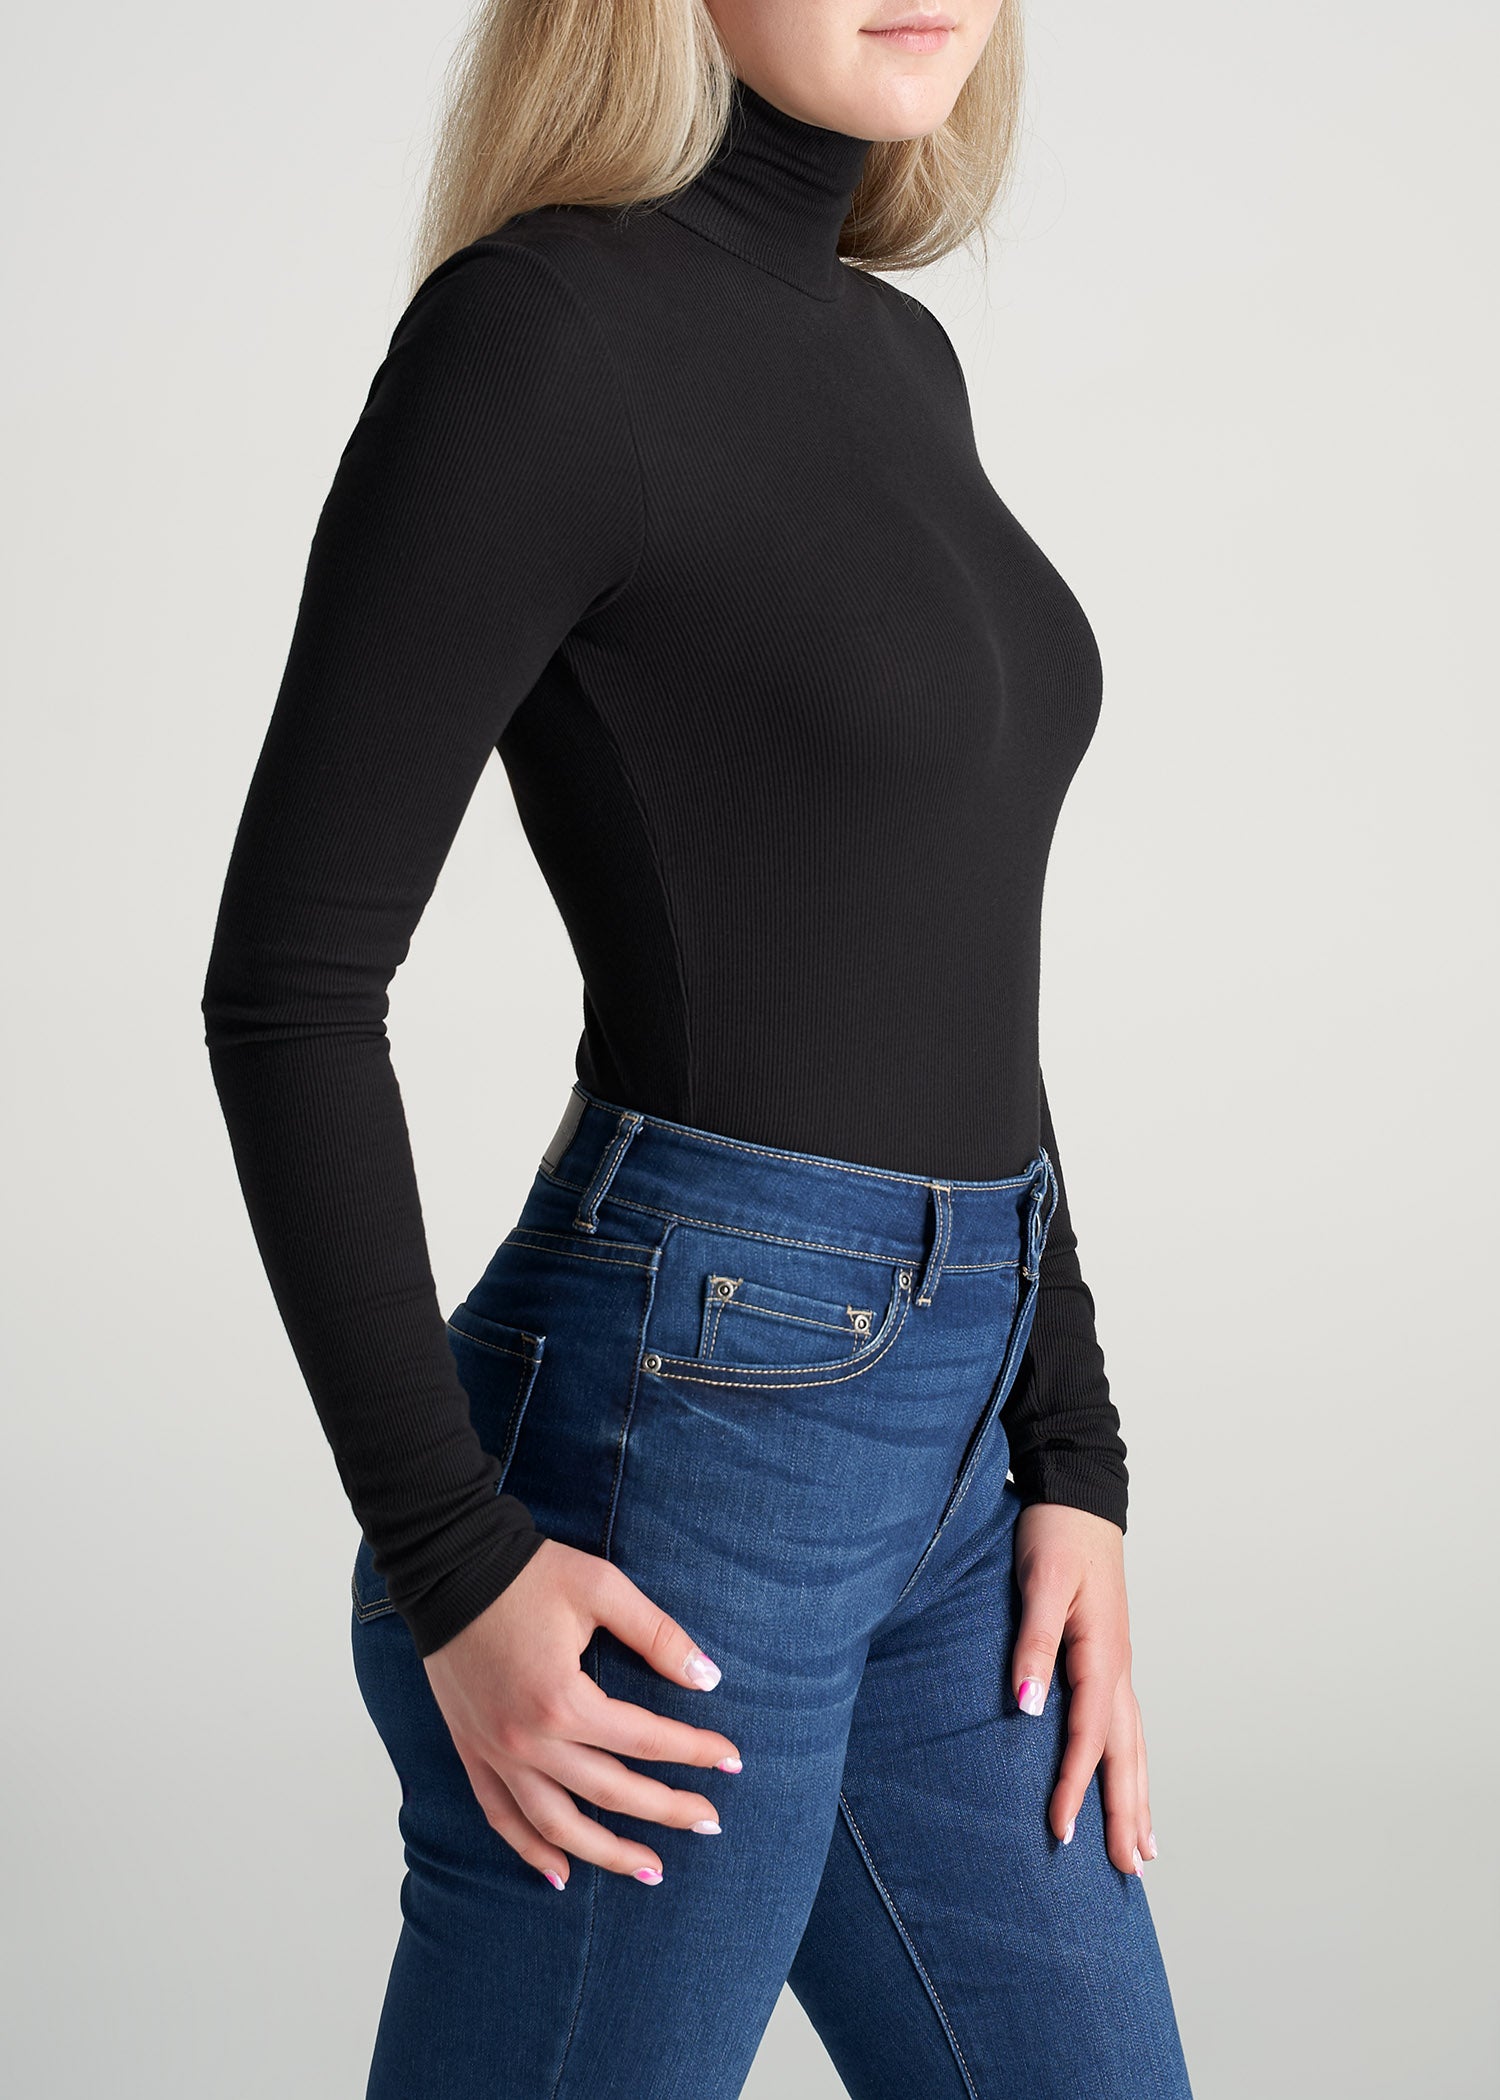 AT Balance High-Rise Leggings for Tall Women in Ribbed Black